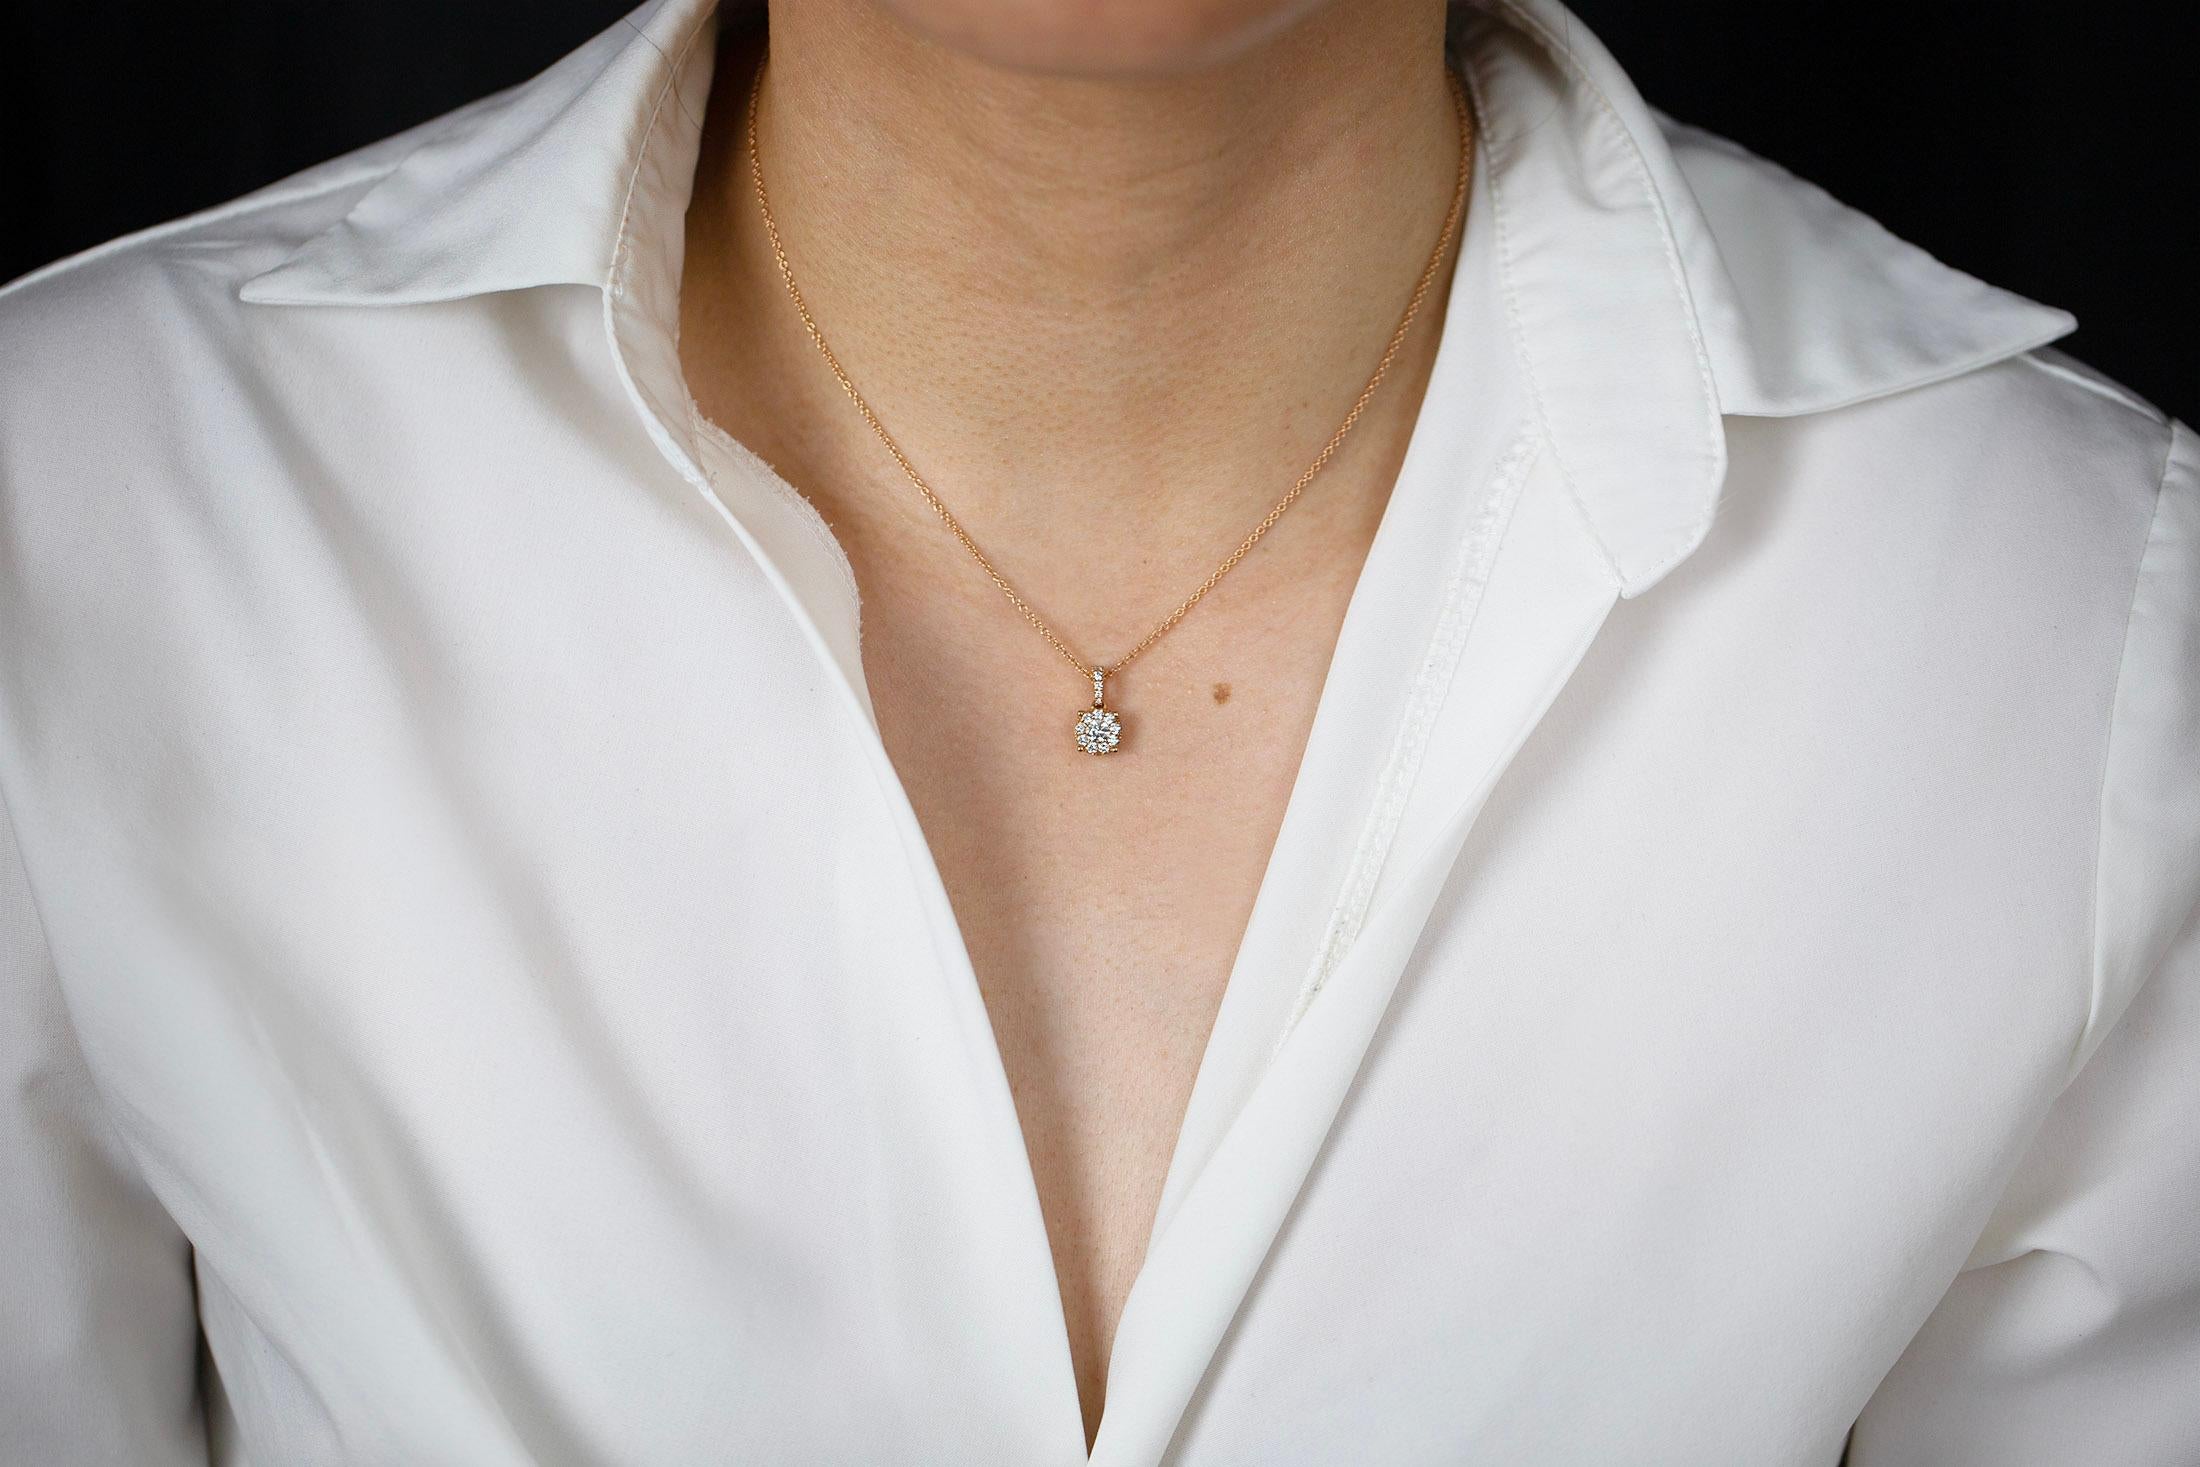 A simple yet unique pendant necklace showcasing a cluster of round brilliant diamonds weighing 0.48 carats total. Suspended on a diamond encrusted bale and 16 inch adjustable rose gold chain. Finely made in 16 inches rose gold.

Style available in